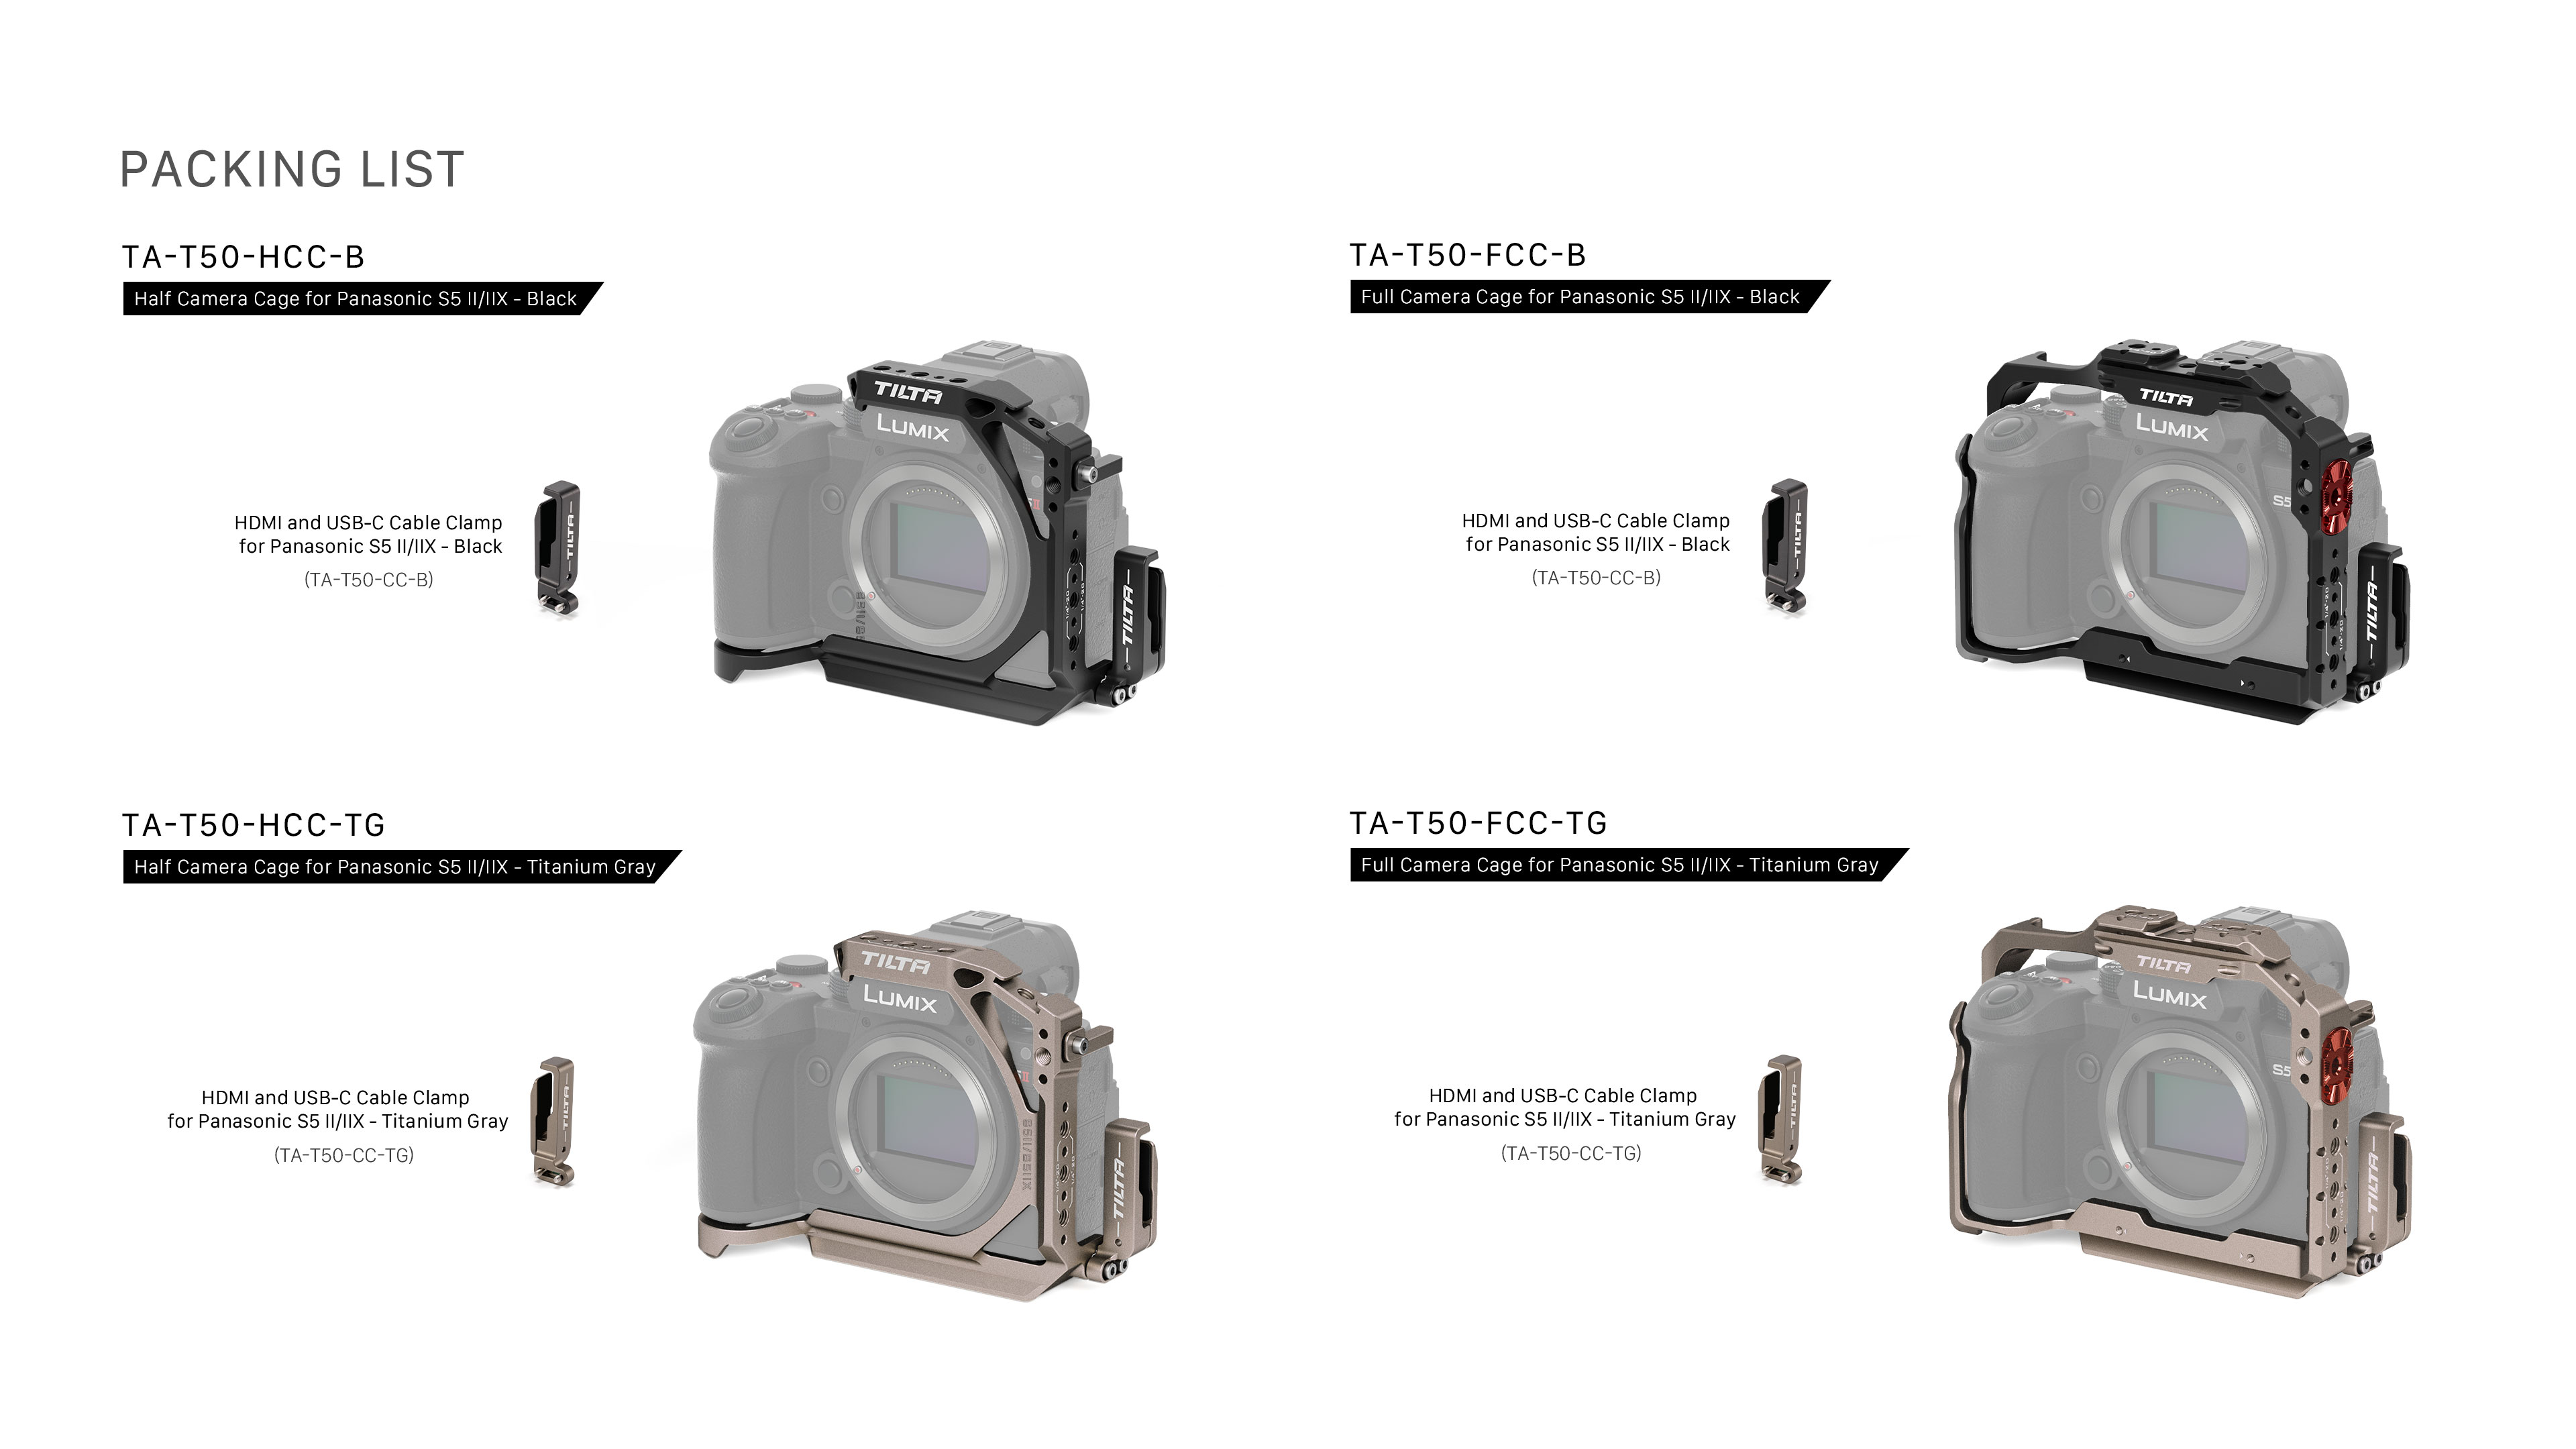 packing list for s5 ii camera cages